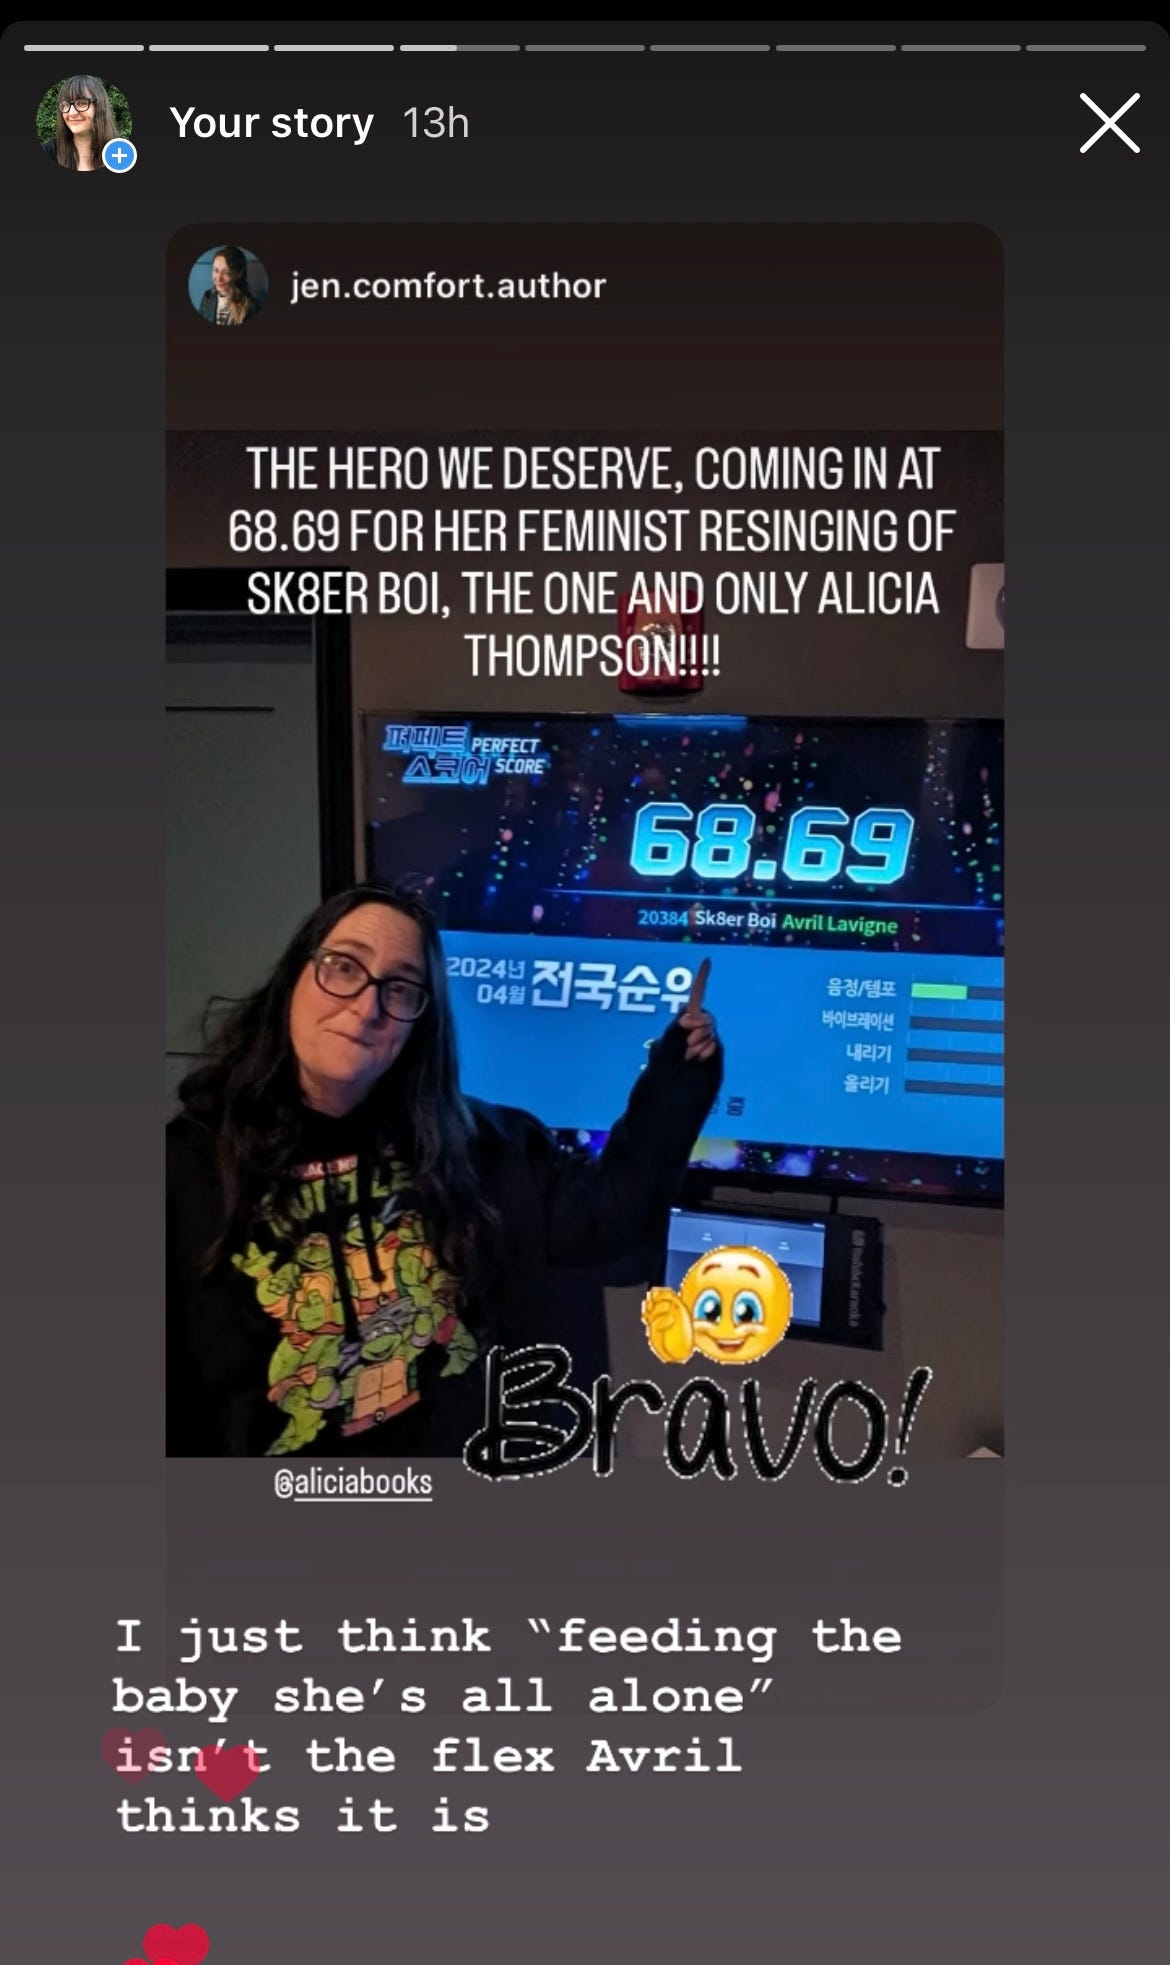 Screenshot of my share of Jen Comfort's story, where she posted a picture of me in my TMNT hoodie pointing at my score of 68.69 on the karaoke leader board, and said "The hero we deserve, coming in at 68.69 for her feminist resinging of Sk8er Boi, the one and only Alicia Thompson!!!!!" with smiley face and "bravo" stickers, and I added the commentary "I just think 'feeding the baby she's all alone' isn't the flex Avril thinks it is."